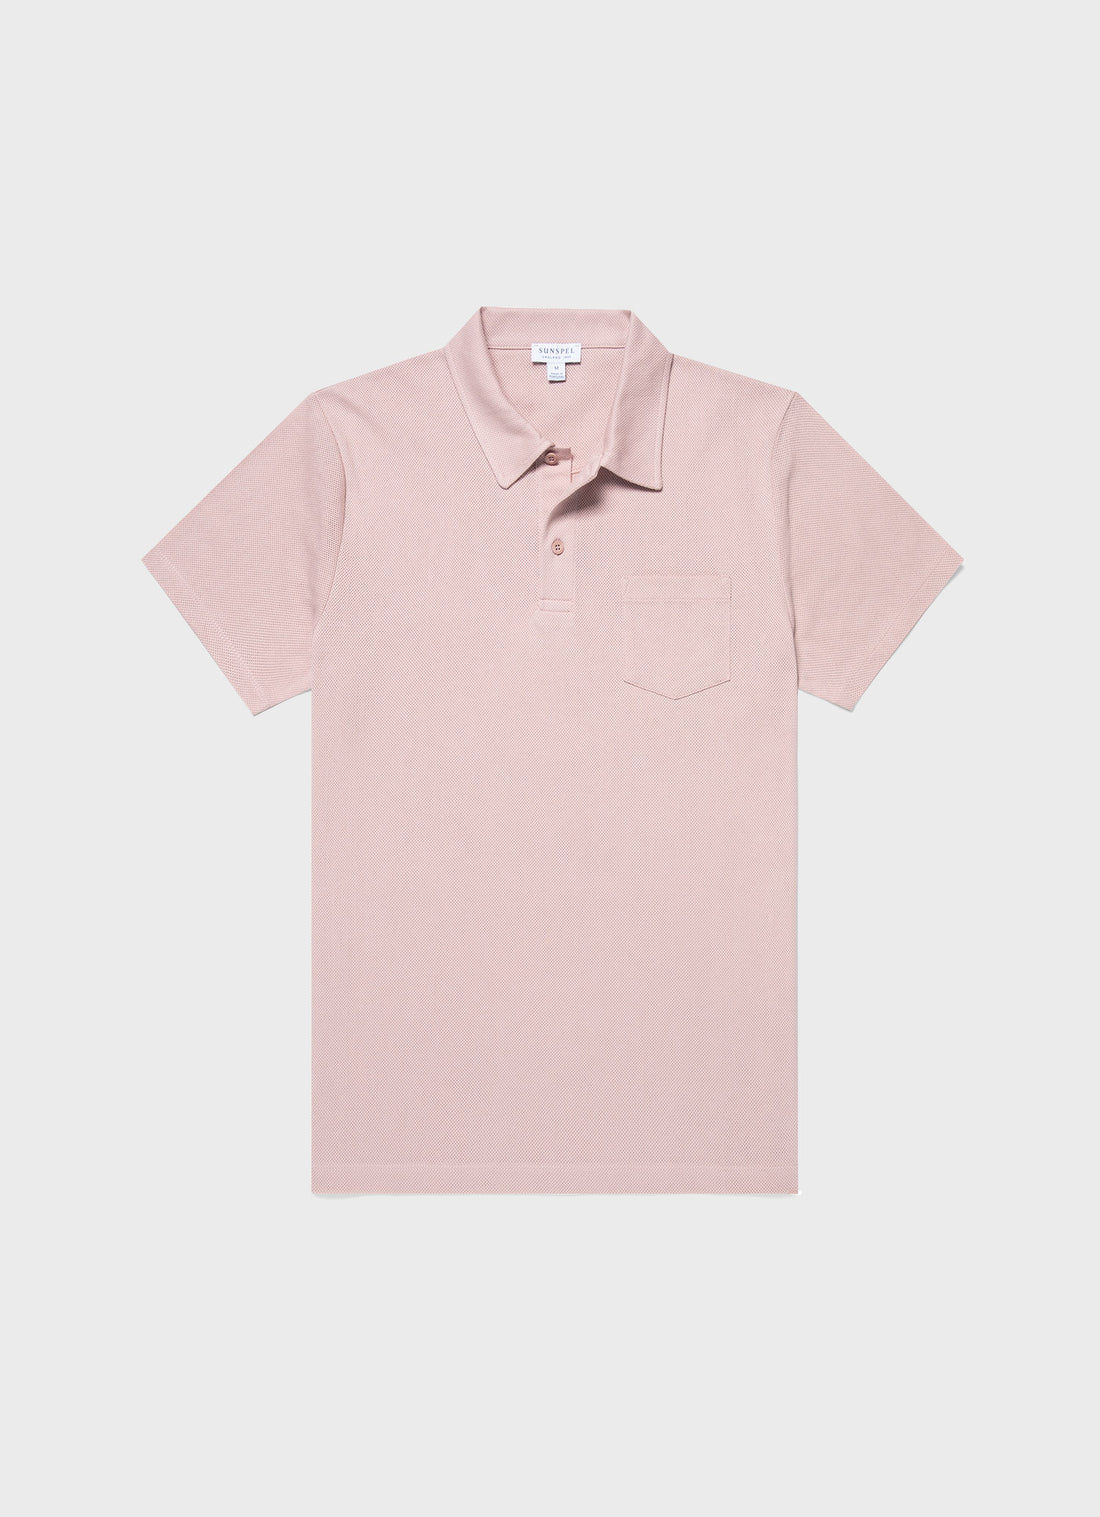 Men's Riviera Polo Shirt in Pale Pink